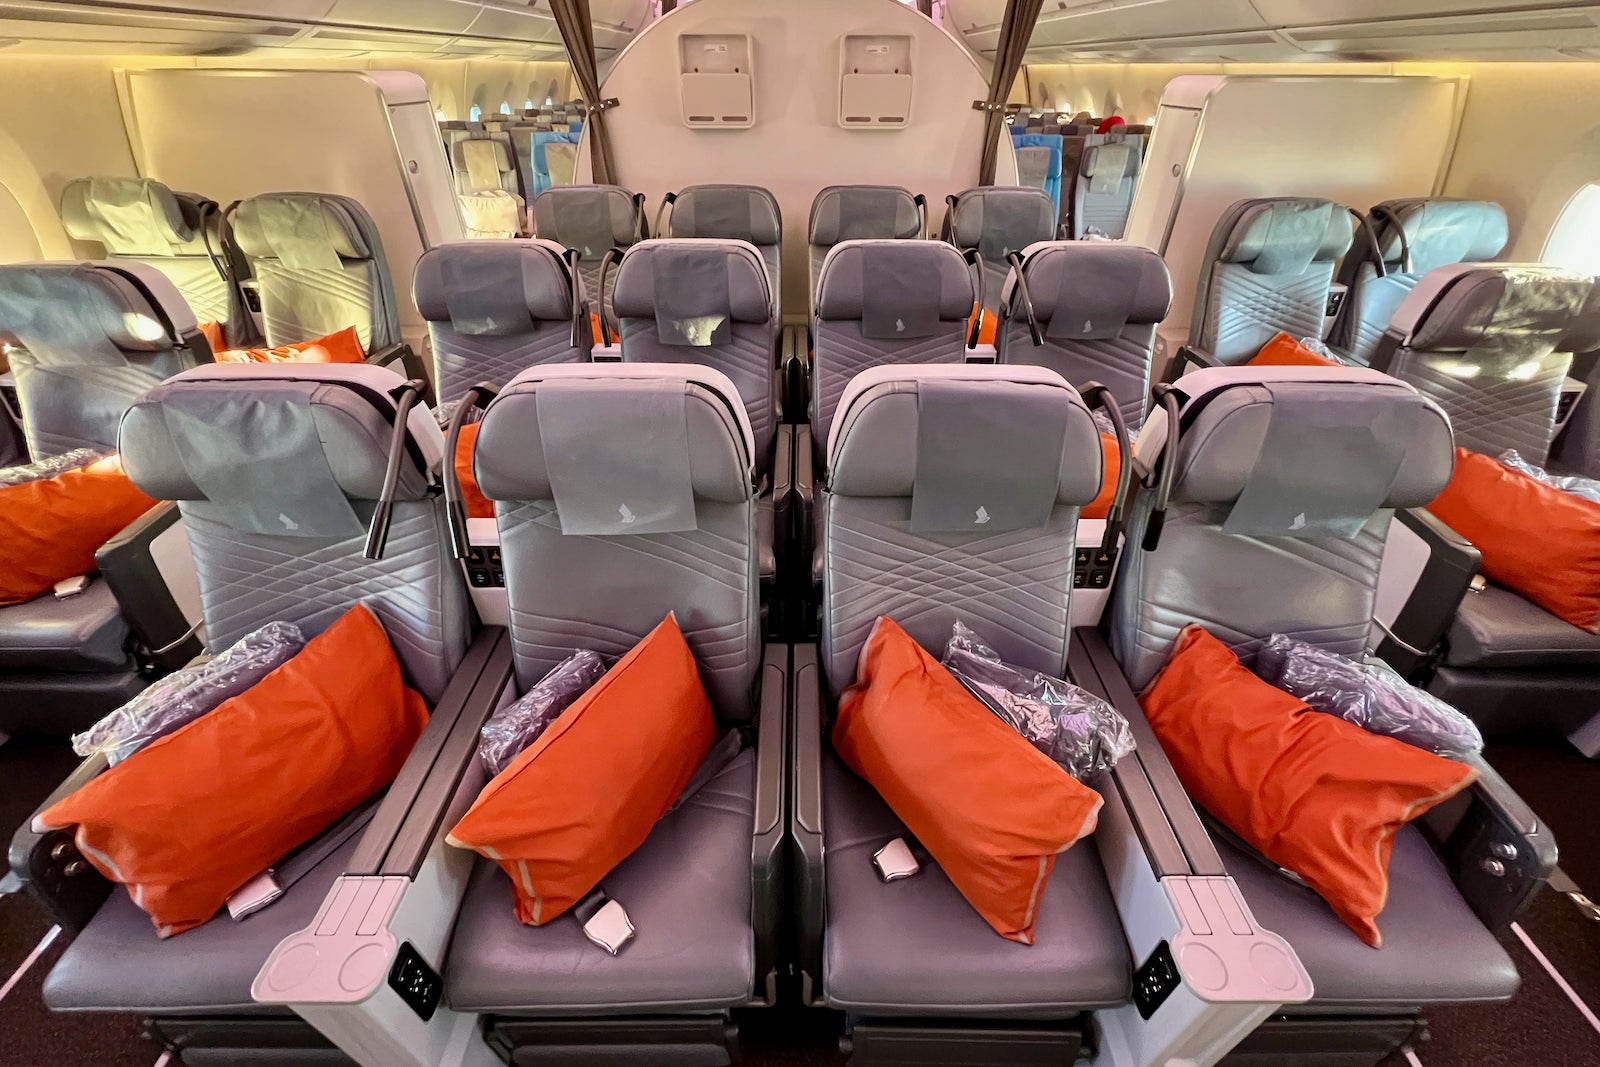 Comparing Singapore Airlines Business And Premium Economy On The Same